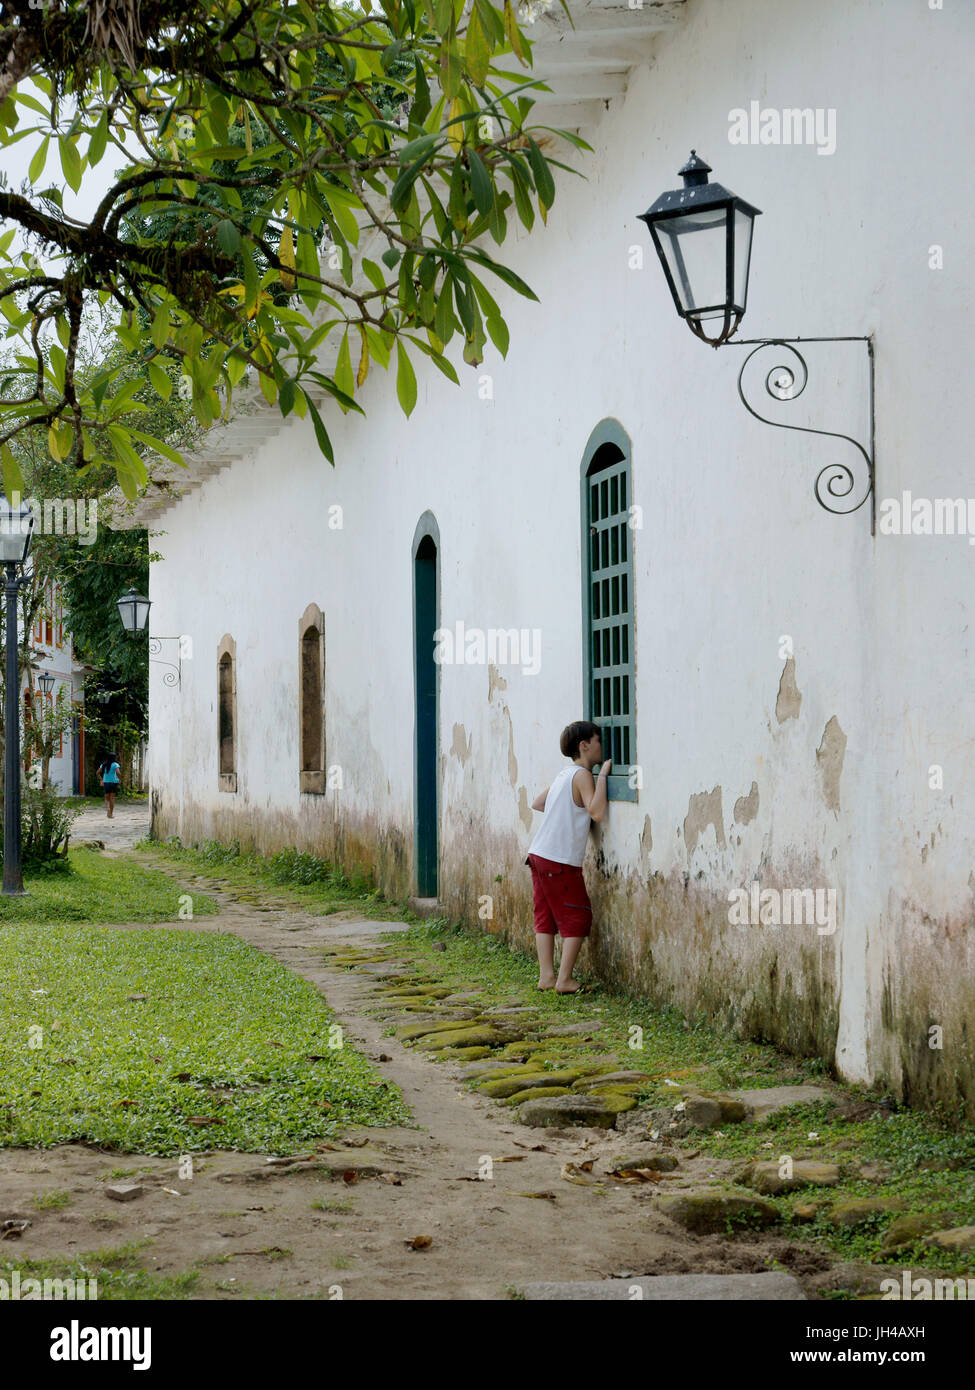 People, young, child, Historical Center, City, Paraty Stock Photo